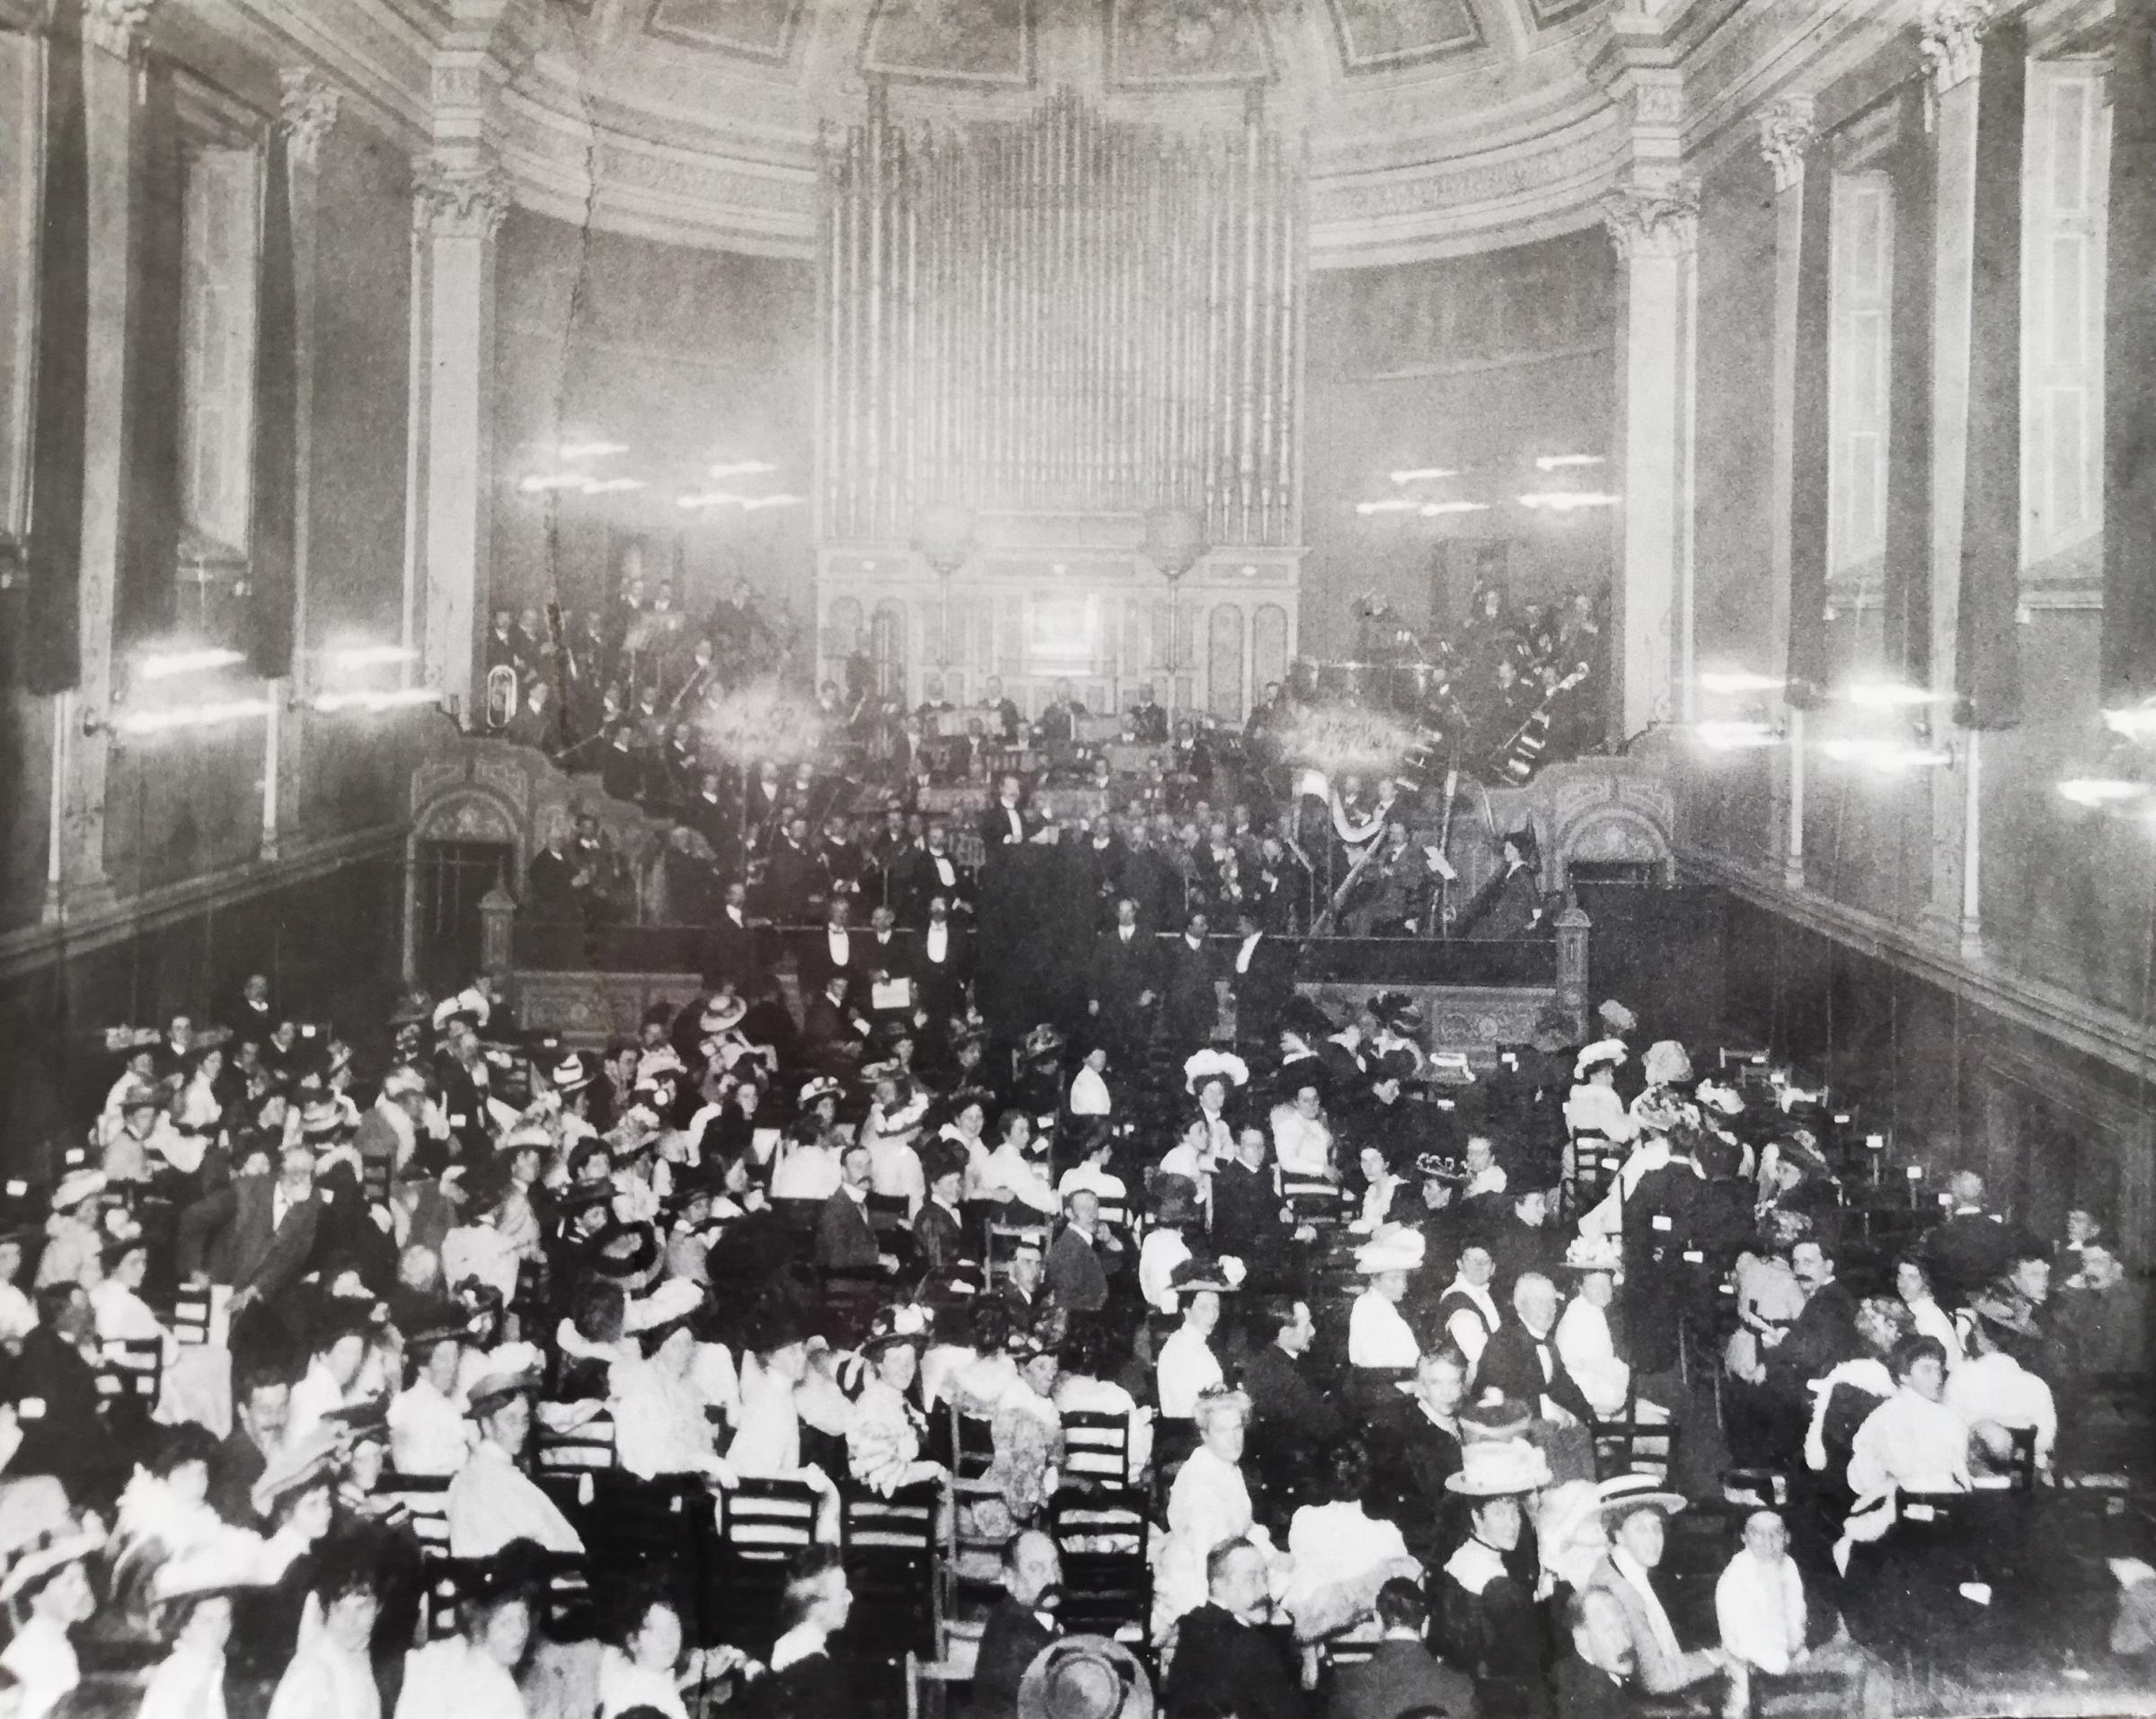 A 1902 Three Choirs Festival in Worcester’s Public Hall. Image TCF archive